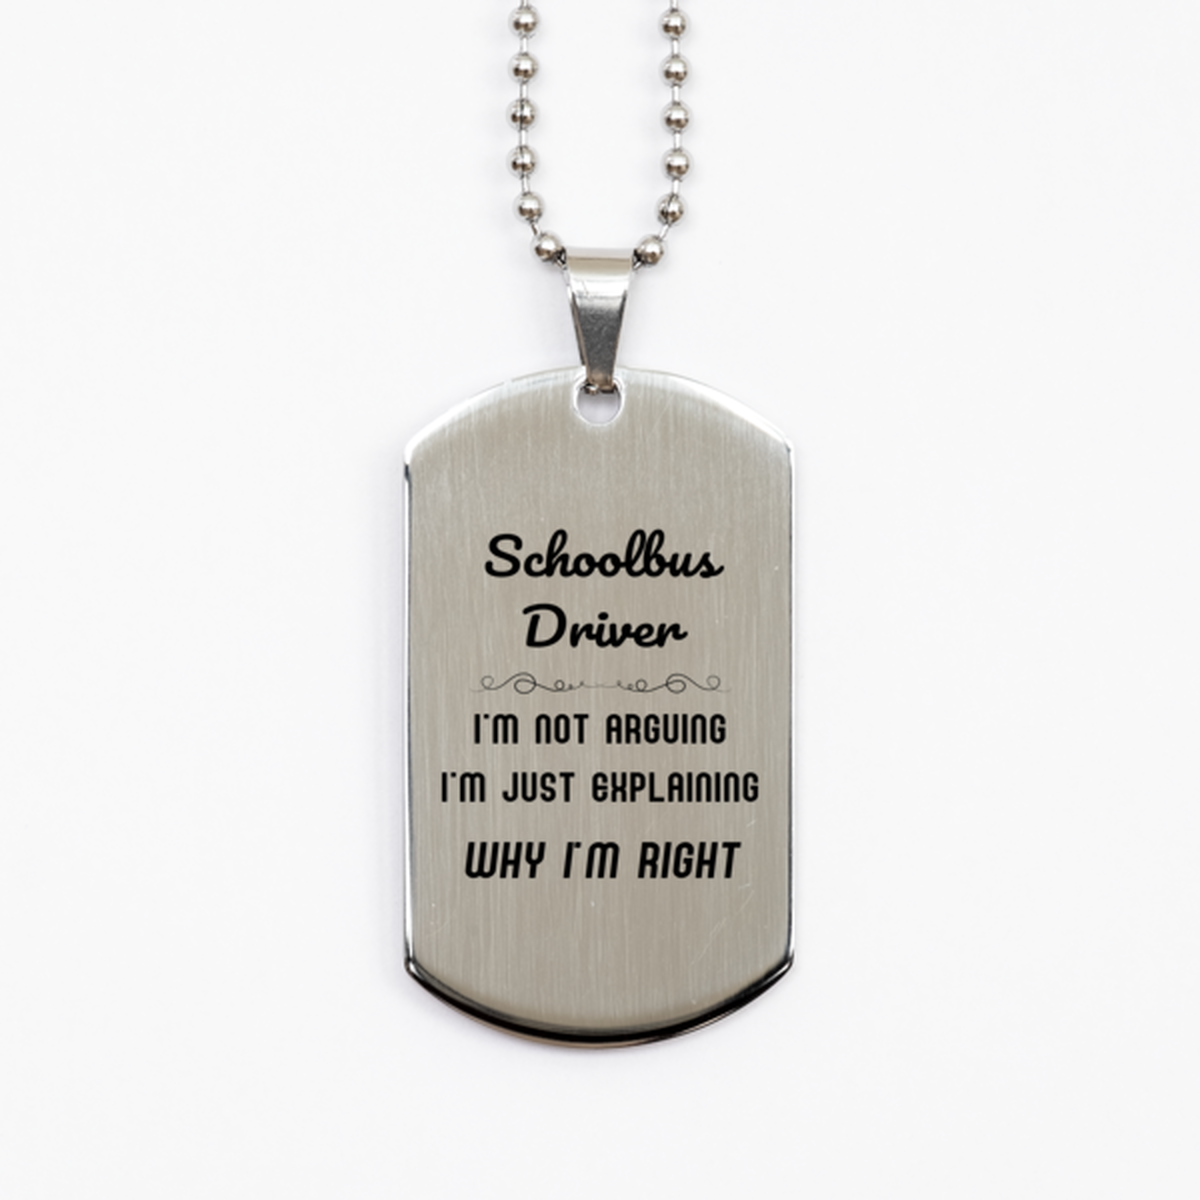 Schoolbus Driver I'm not Arguing. I'm Just Explaining Why I'm RIGHT Silver Dog Tag, Funny Saying Quote Schoolbus Driver Gifts For Schoolbus Driver Graduation Birthday Christmas Gifts for Men Women Coworker